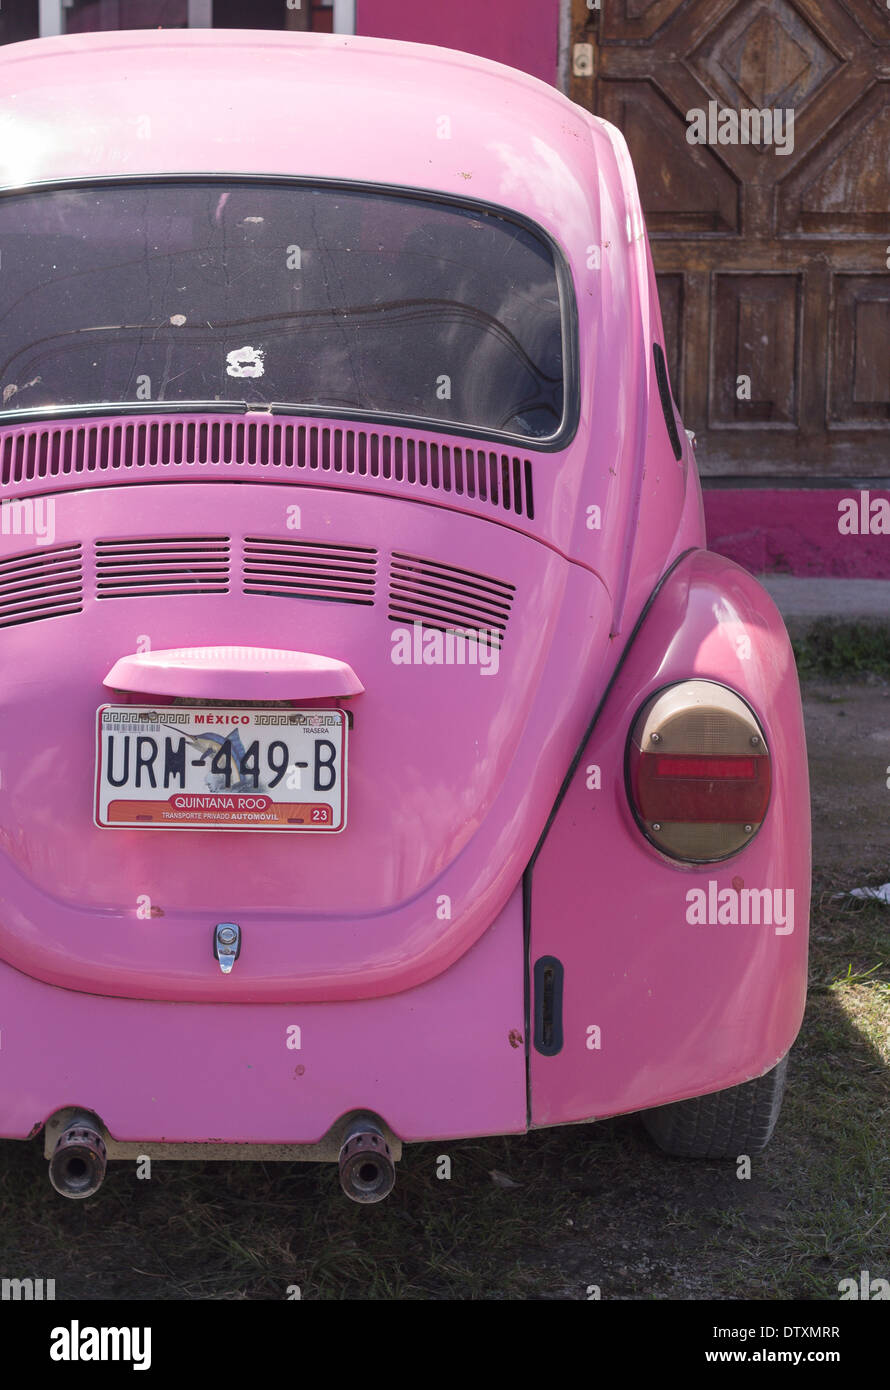 Pink VW Beetle. A bright pink volkswagon beetle parked in front of a pink house. Tulum, Quintana Roo, Mexico Stock Photo